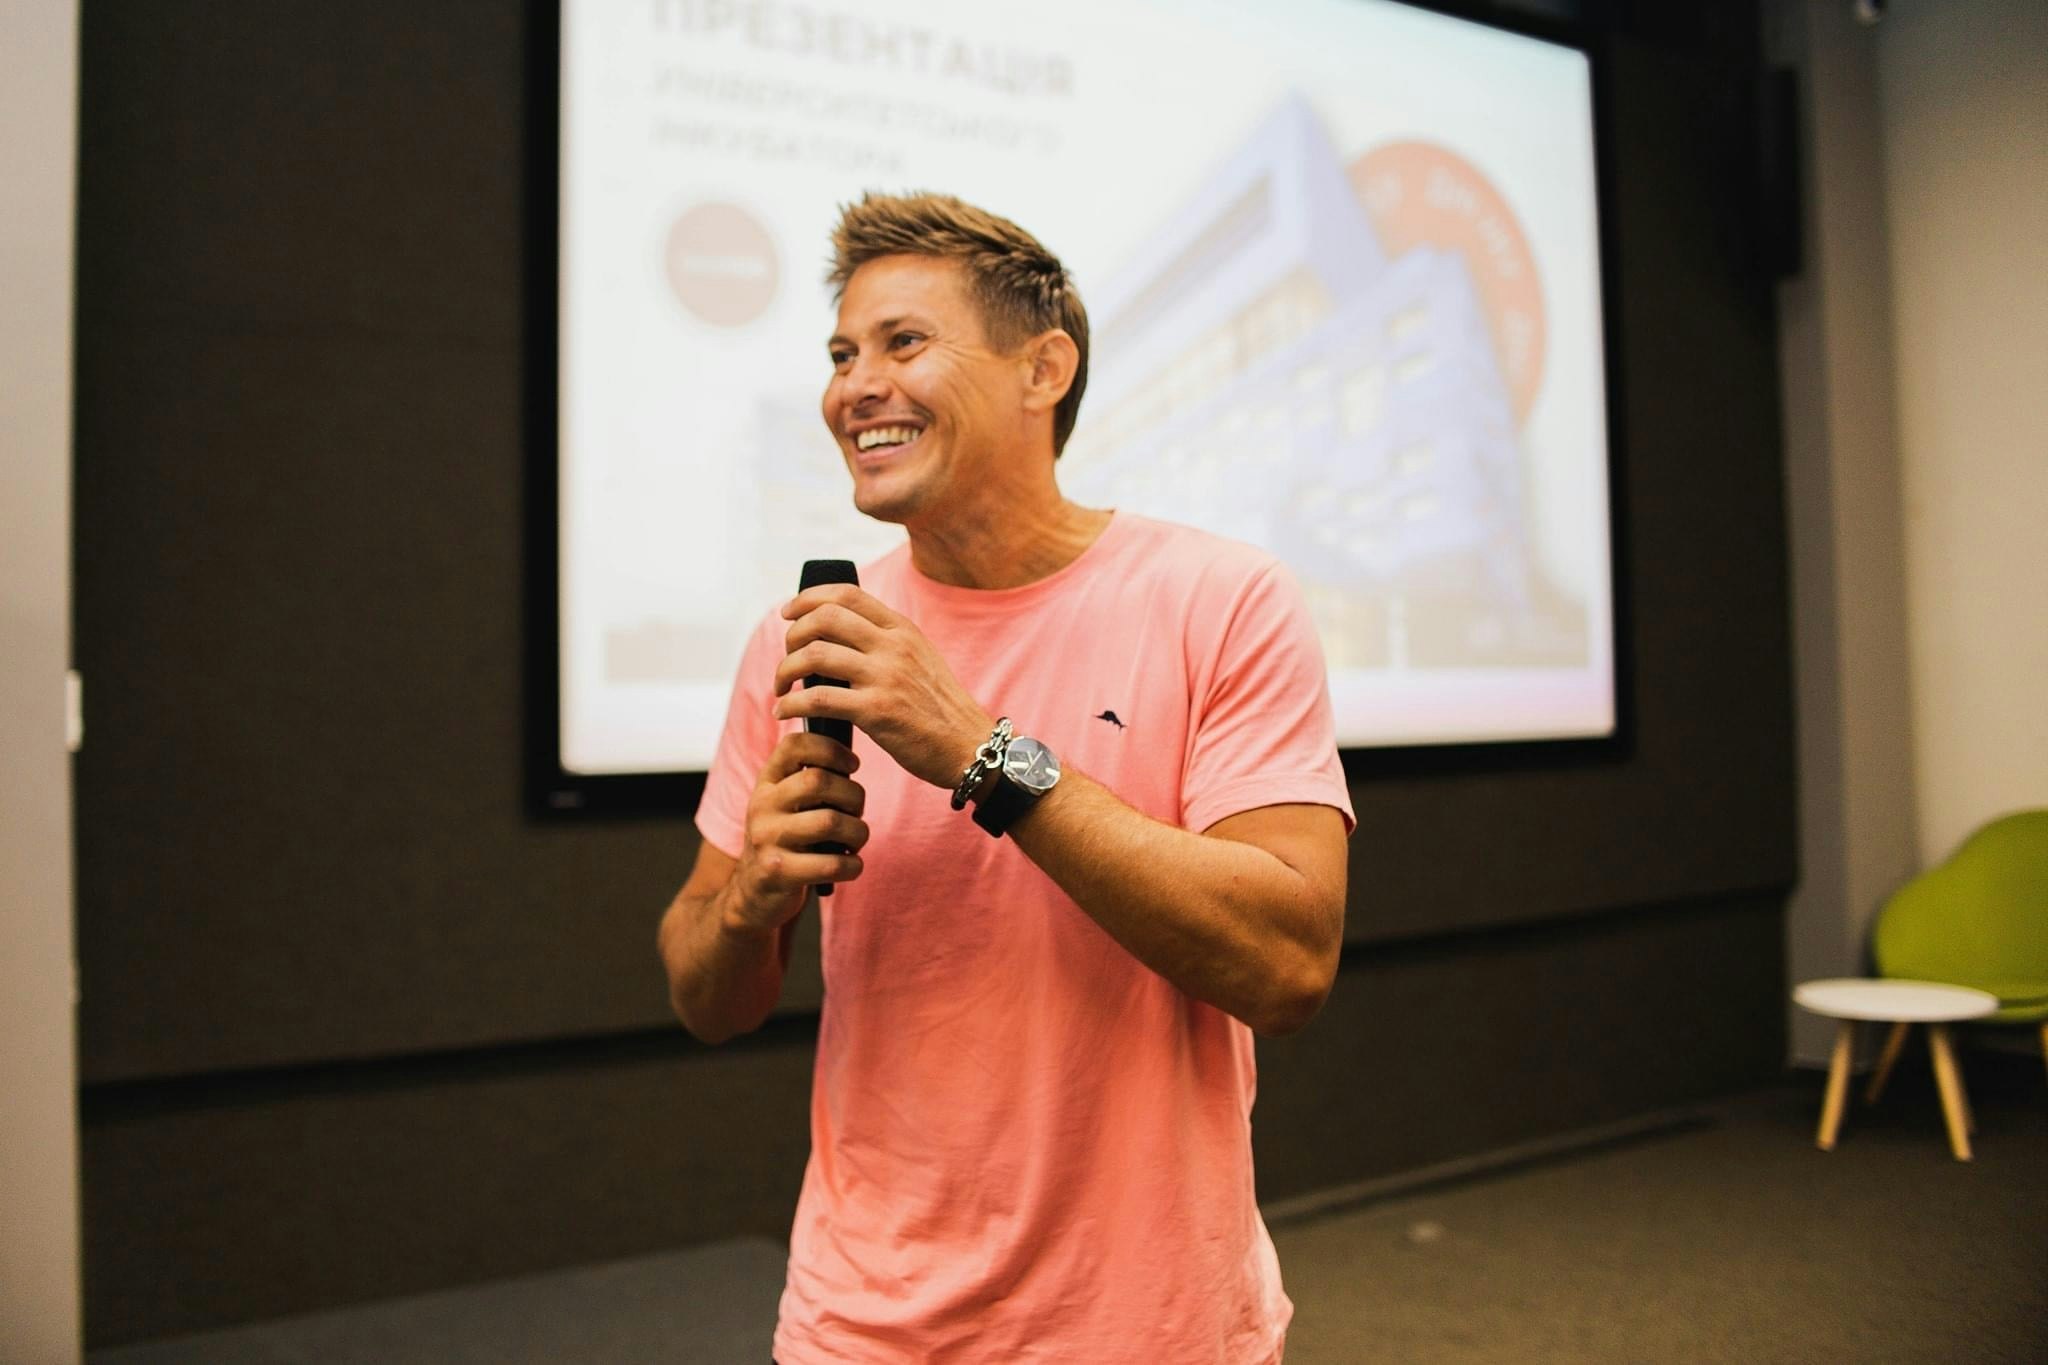 A landscape photo of Ivan Petrenko in a pink tshirt holding a microphone